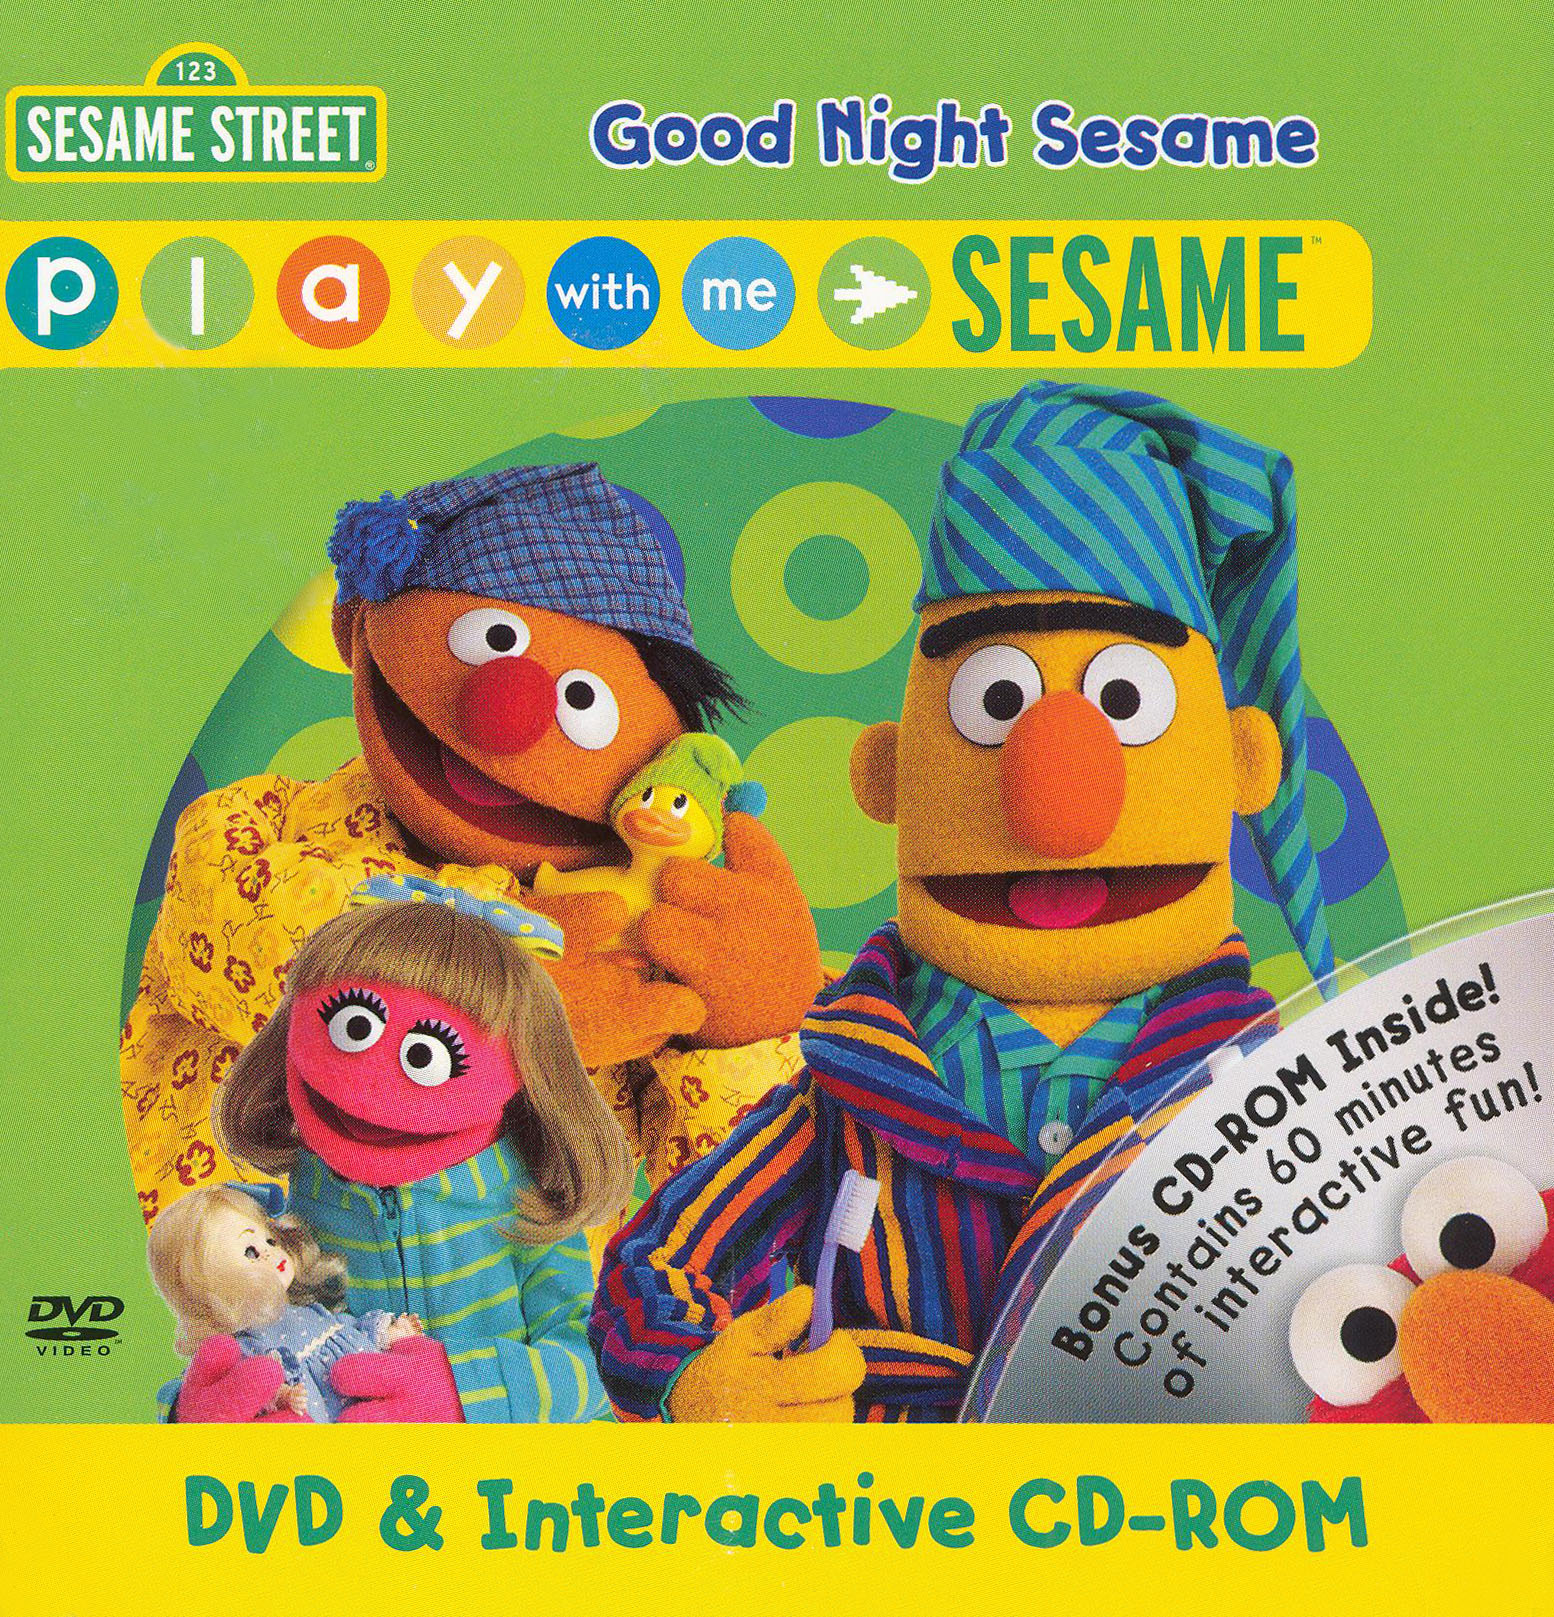 YESASIA: Recommended Items - Play With Me Sesame - Goodnight